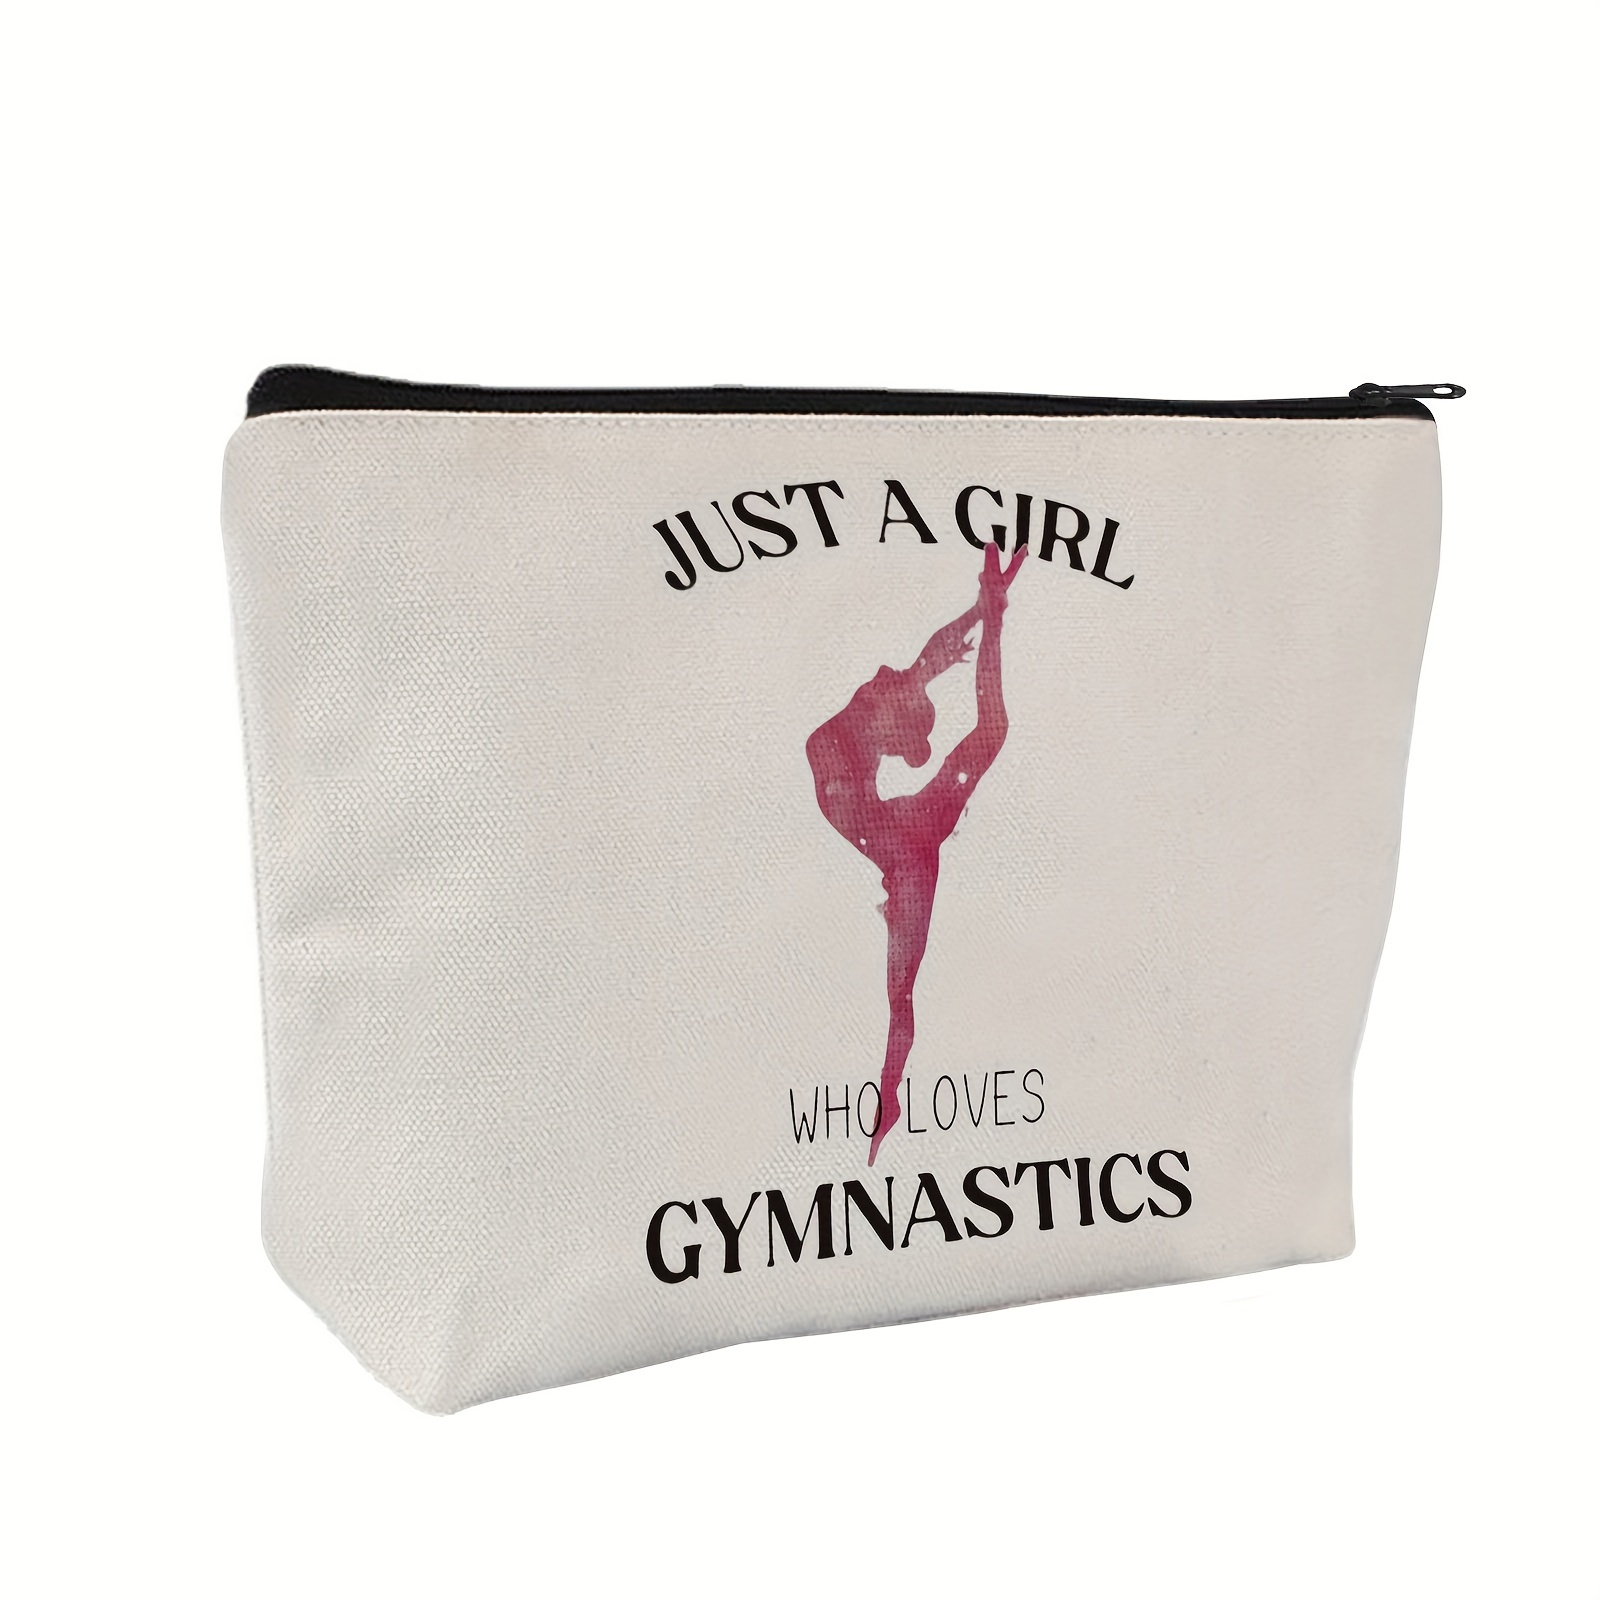 

Inspirational Gymnastics Makeup Bag For Women & Girls - Perfect Gift For Gymnasts, Coaches, And Sports Enthusiasts - Durable Canvas, Non-scented